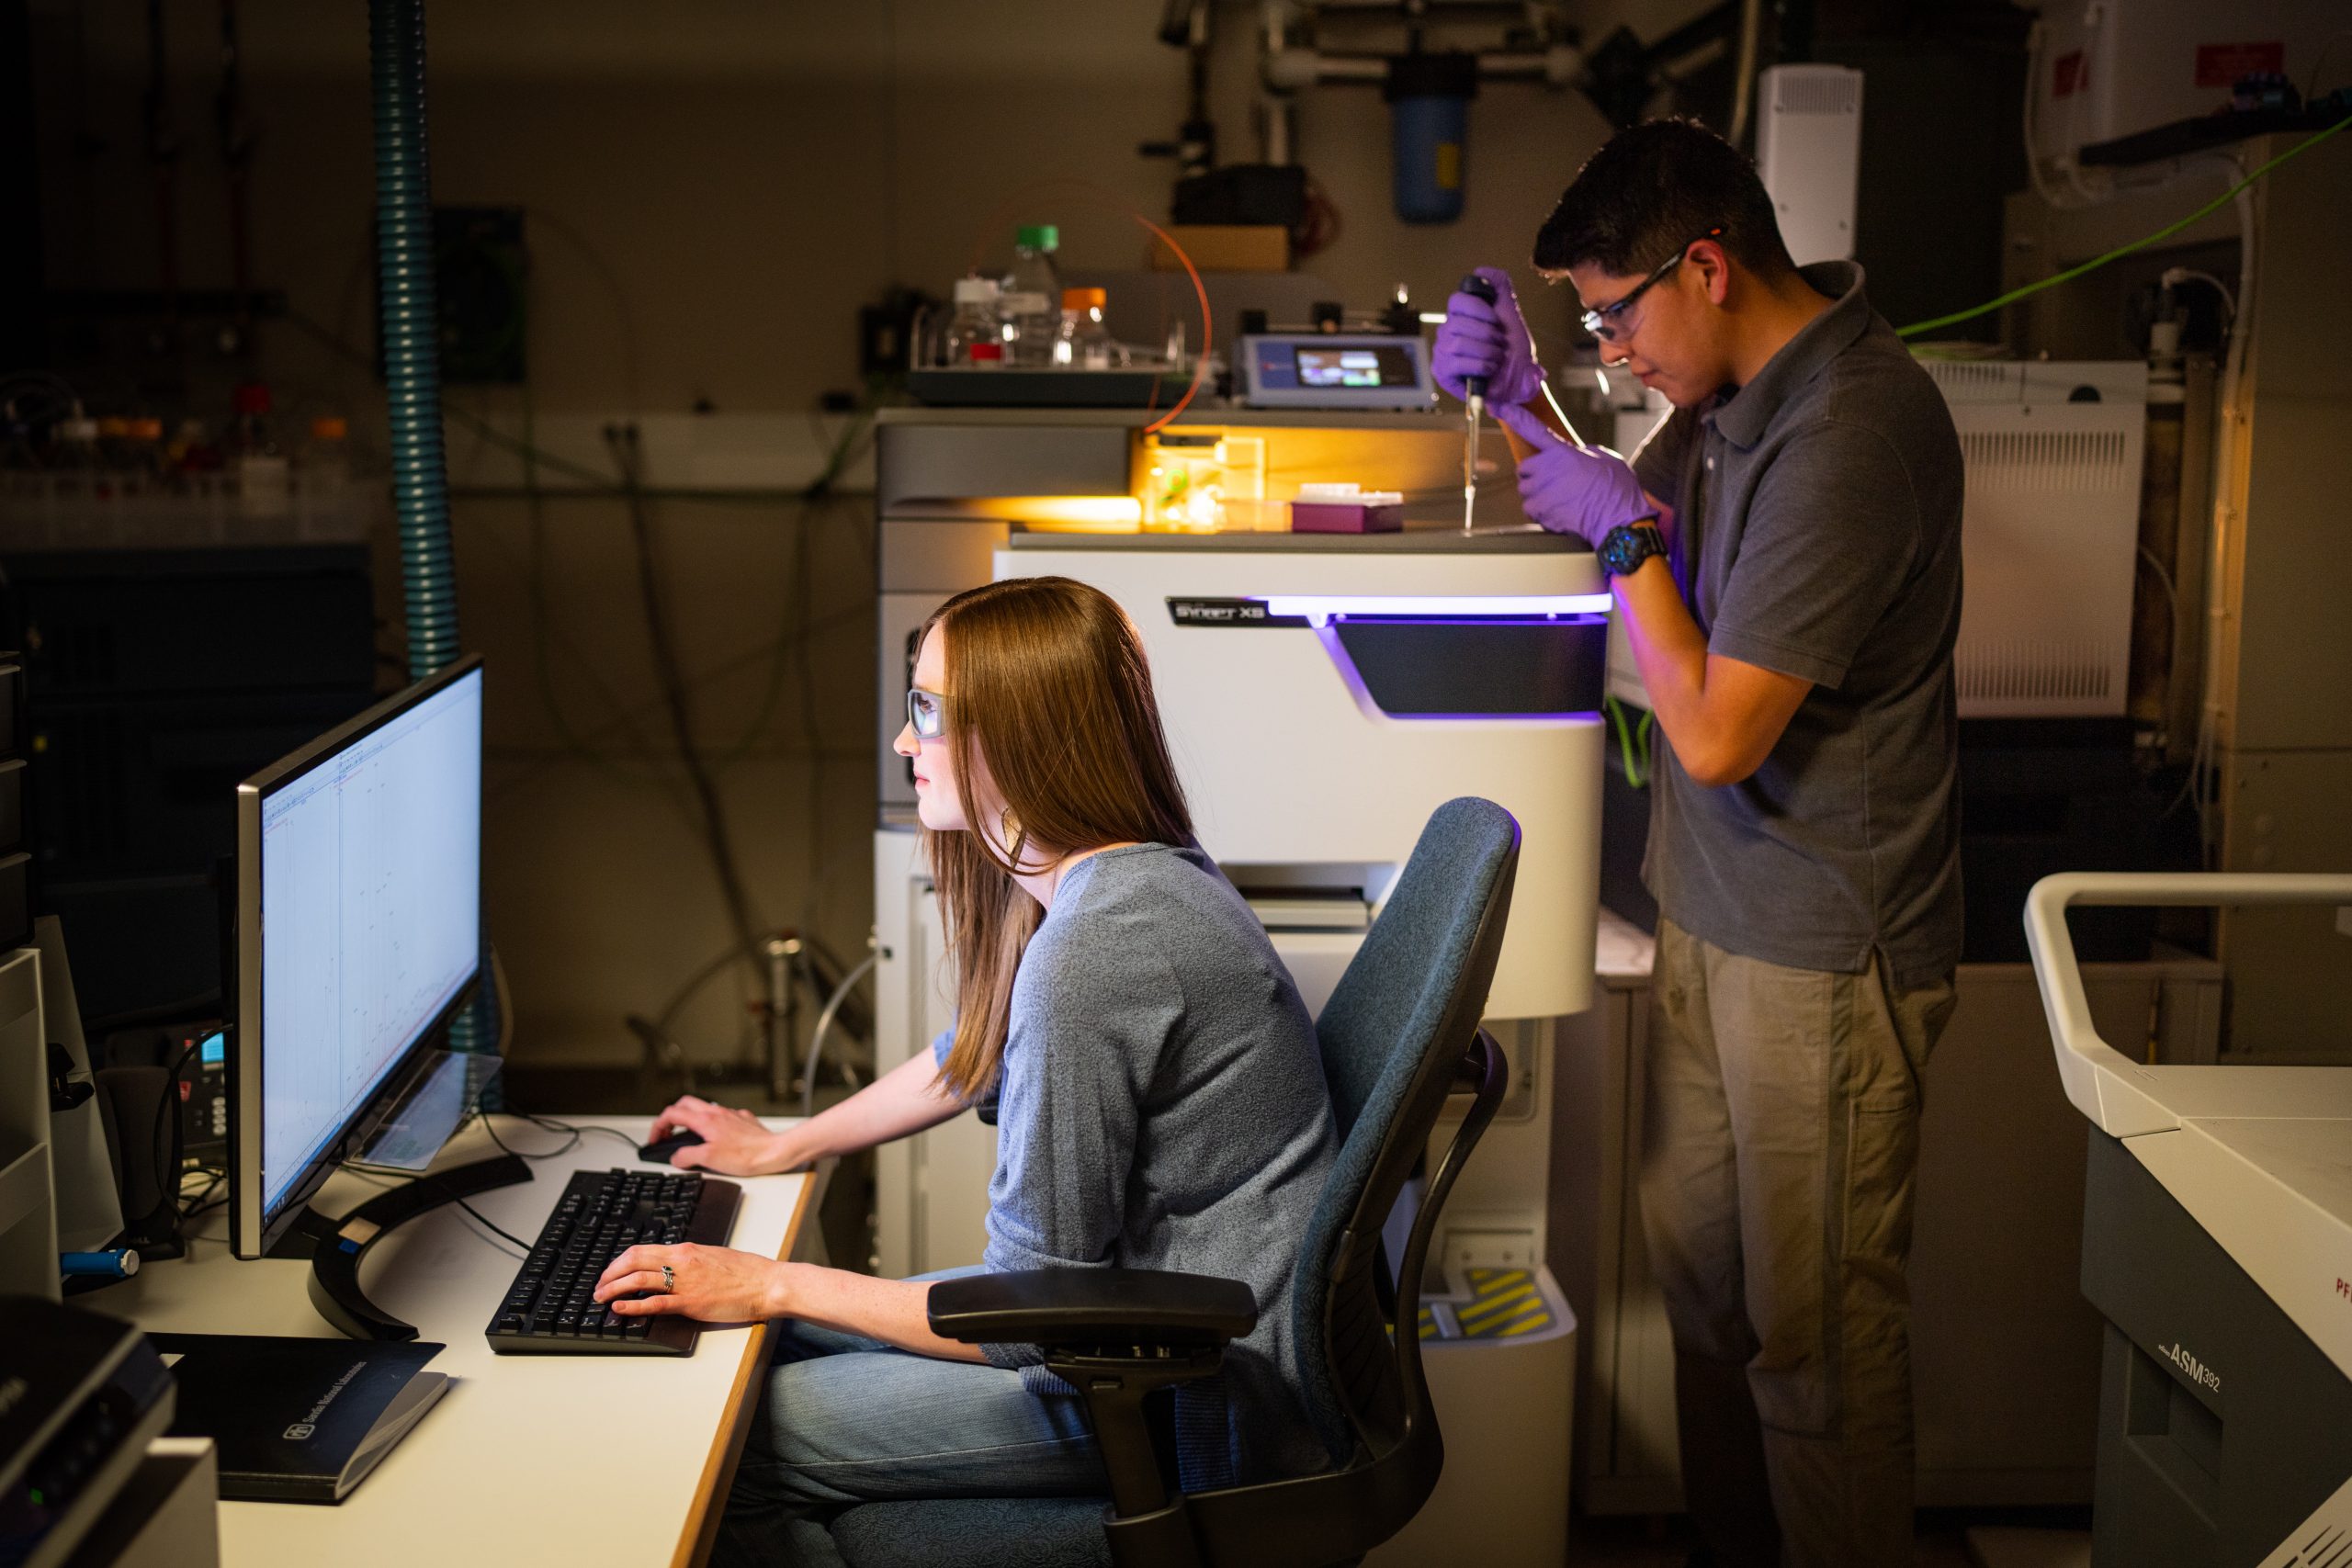 Jessica Kustas, left, and Andre Benally work with a mass spectrometer at Sandia National Laboratories while trying to pair up technologies to go beyond just absorbing PFAS. (Photo by Craig Fritz)